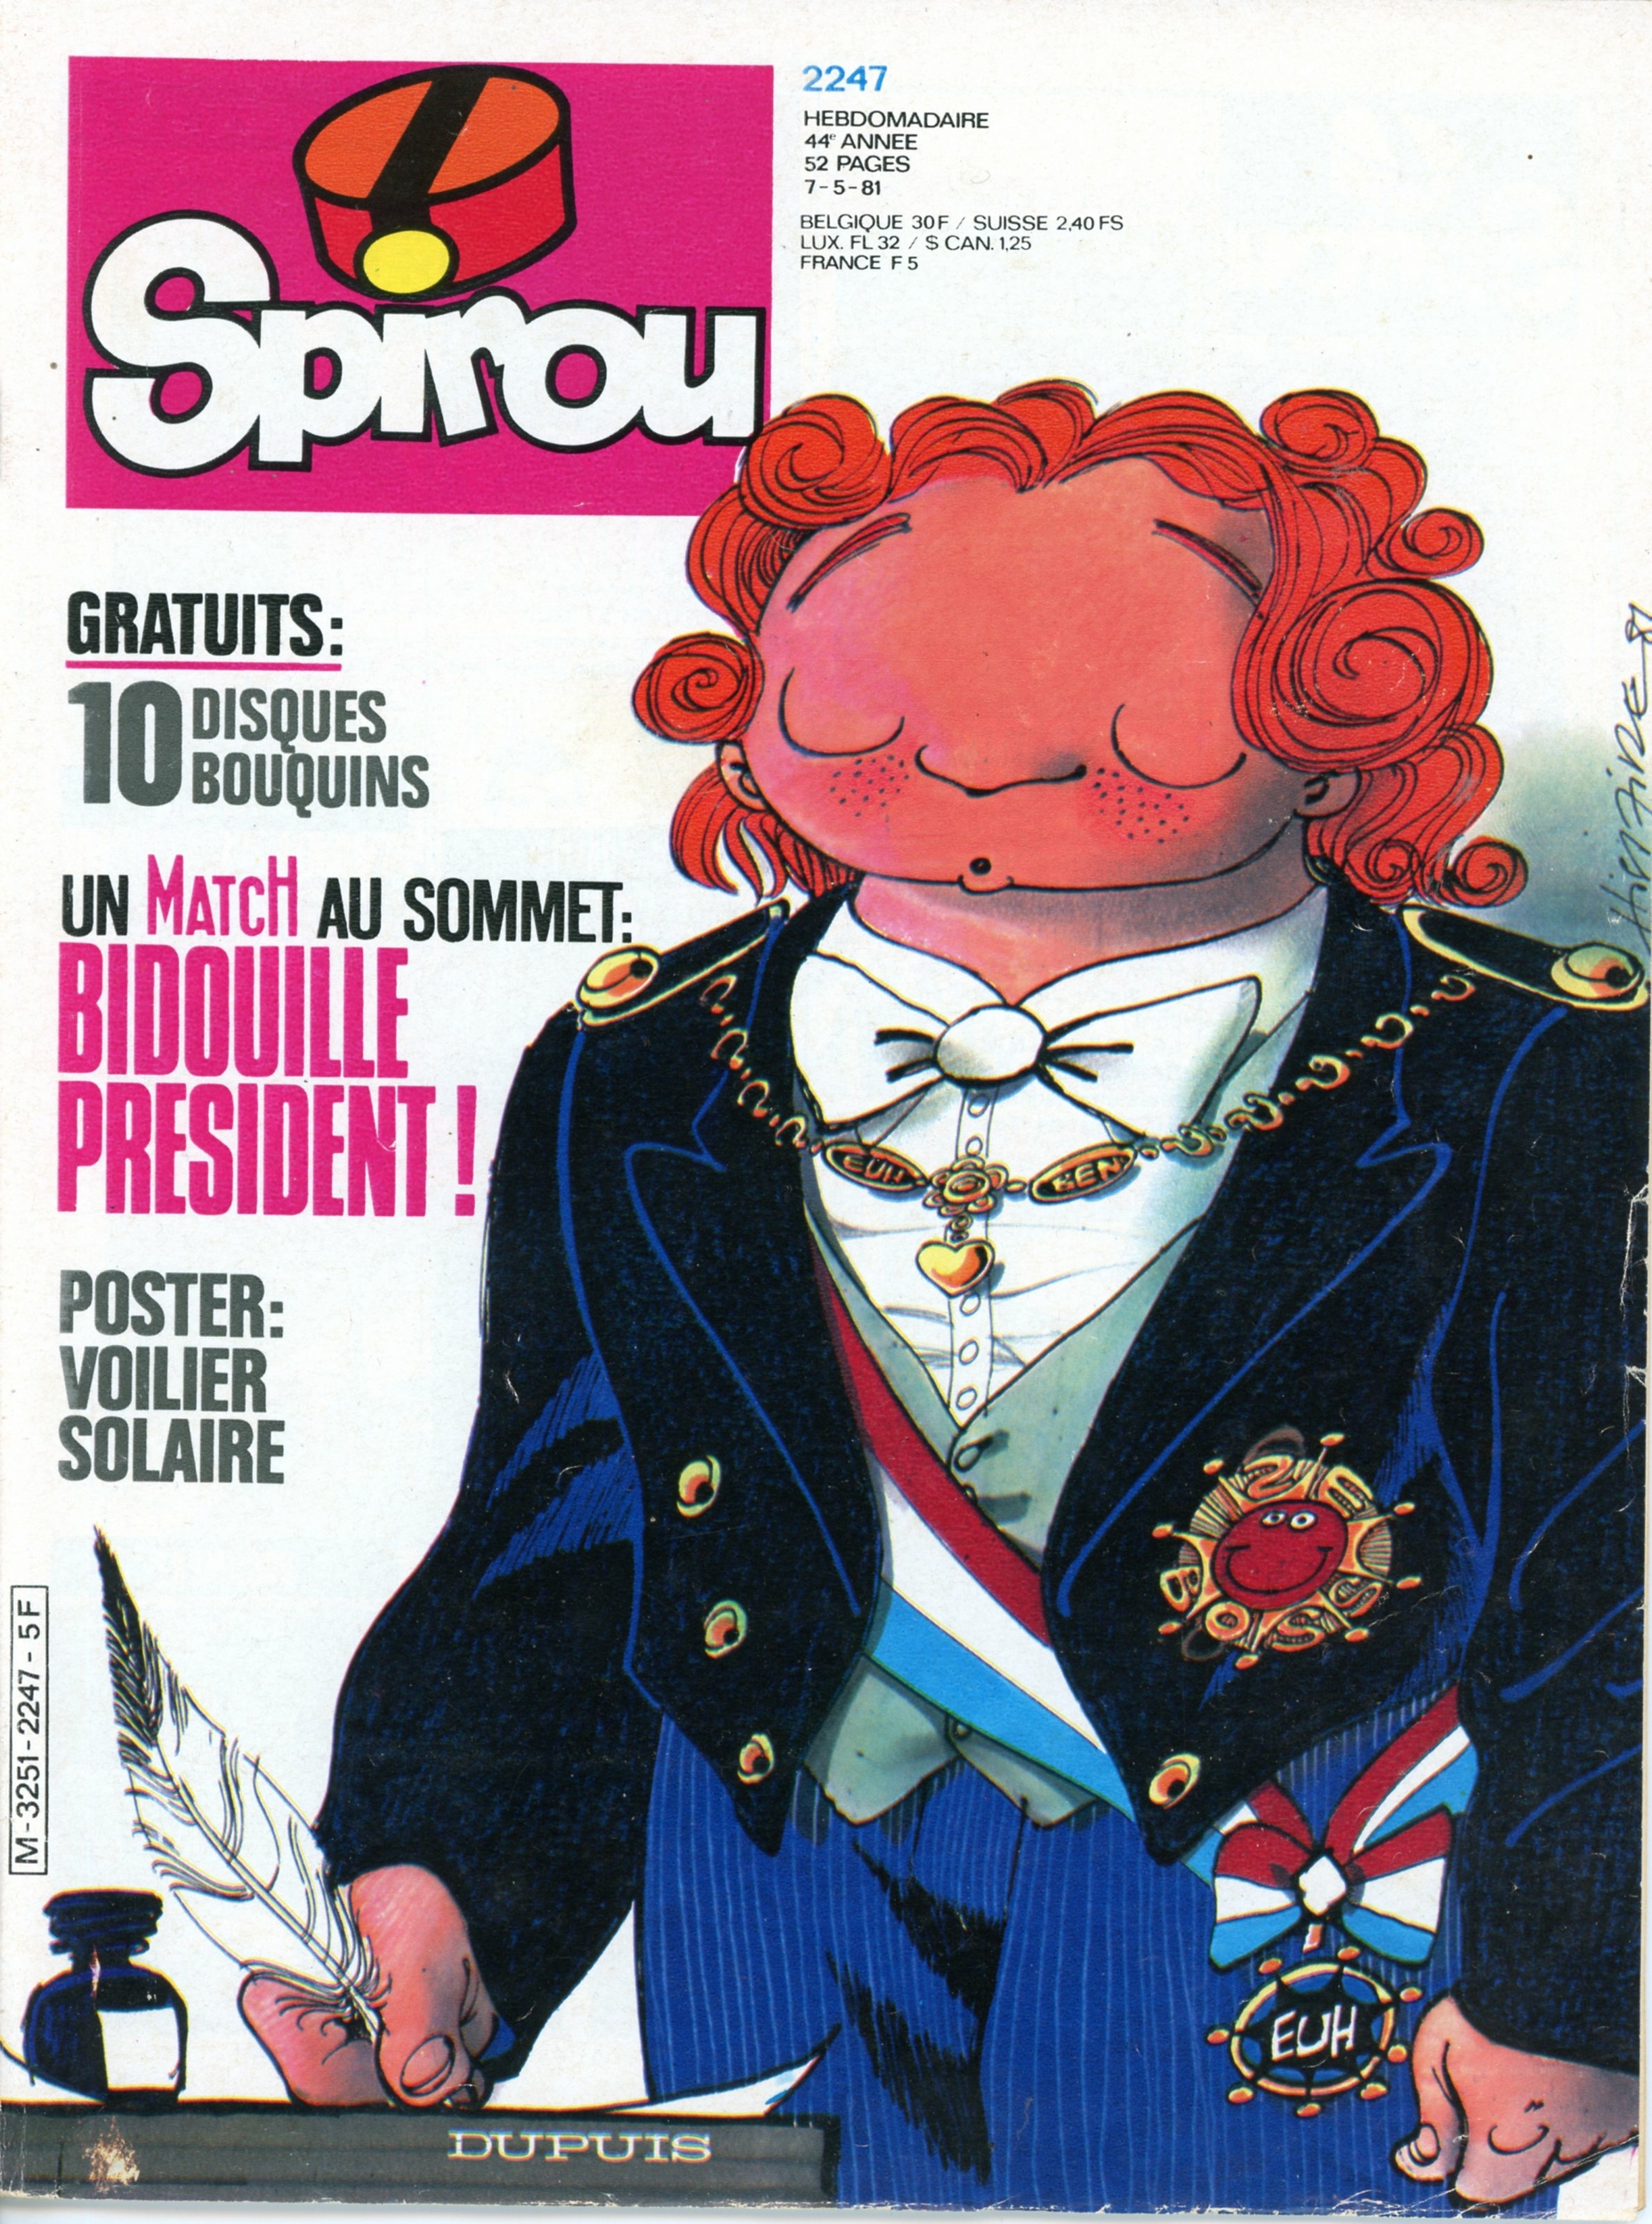 JOURNAL SPIROU N° 2247 1981 + SUPPLÉMENT POSTER VOILIER SOLAIRE